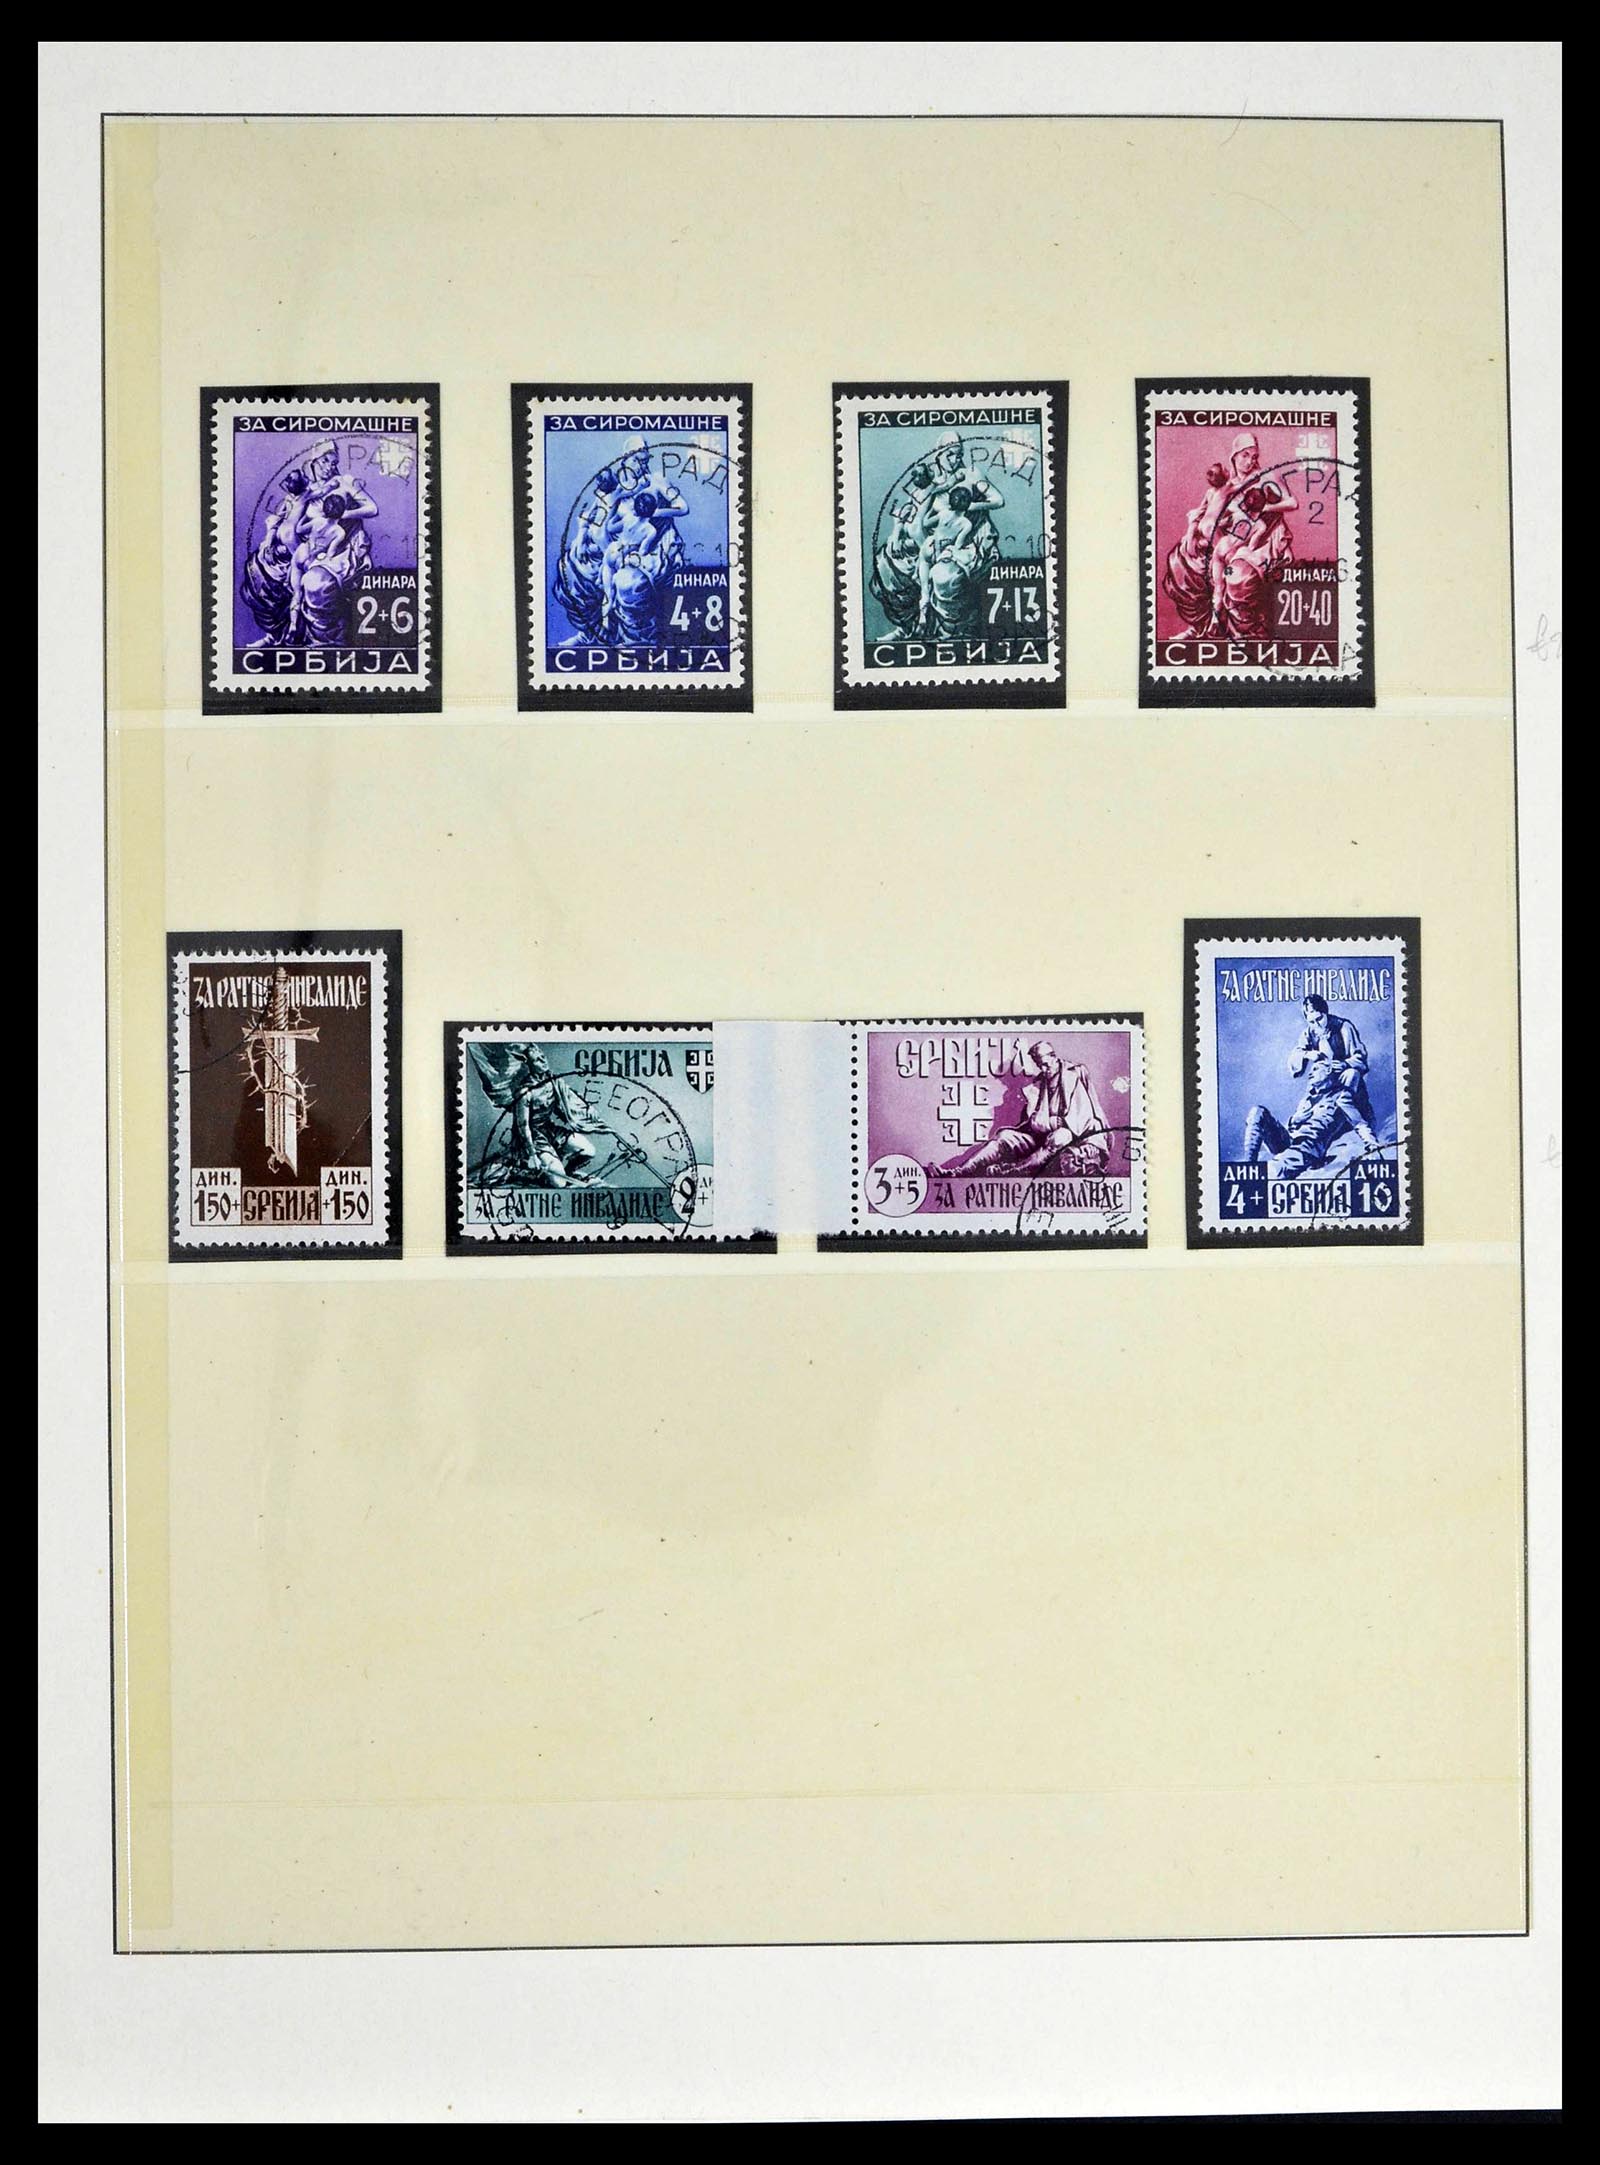 39396 0020 - Stamp collection 39396 German occupation WW II 1939-1945.